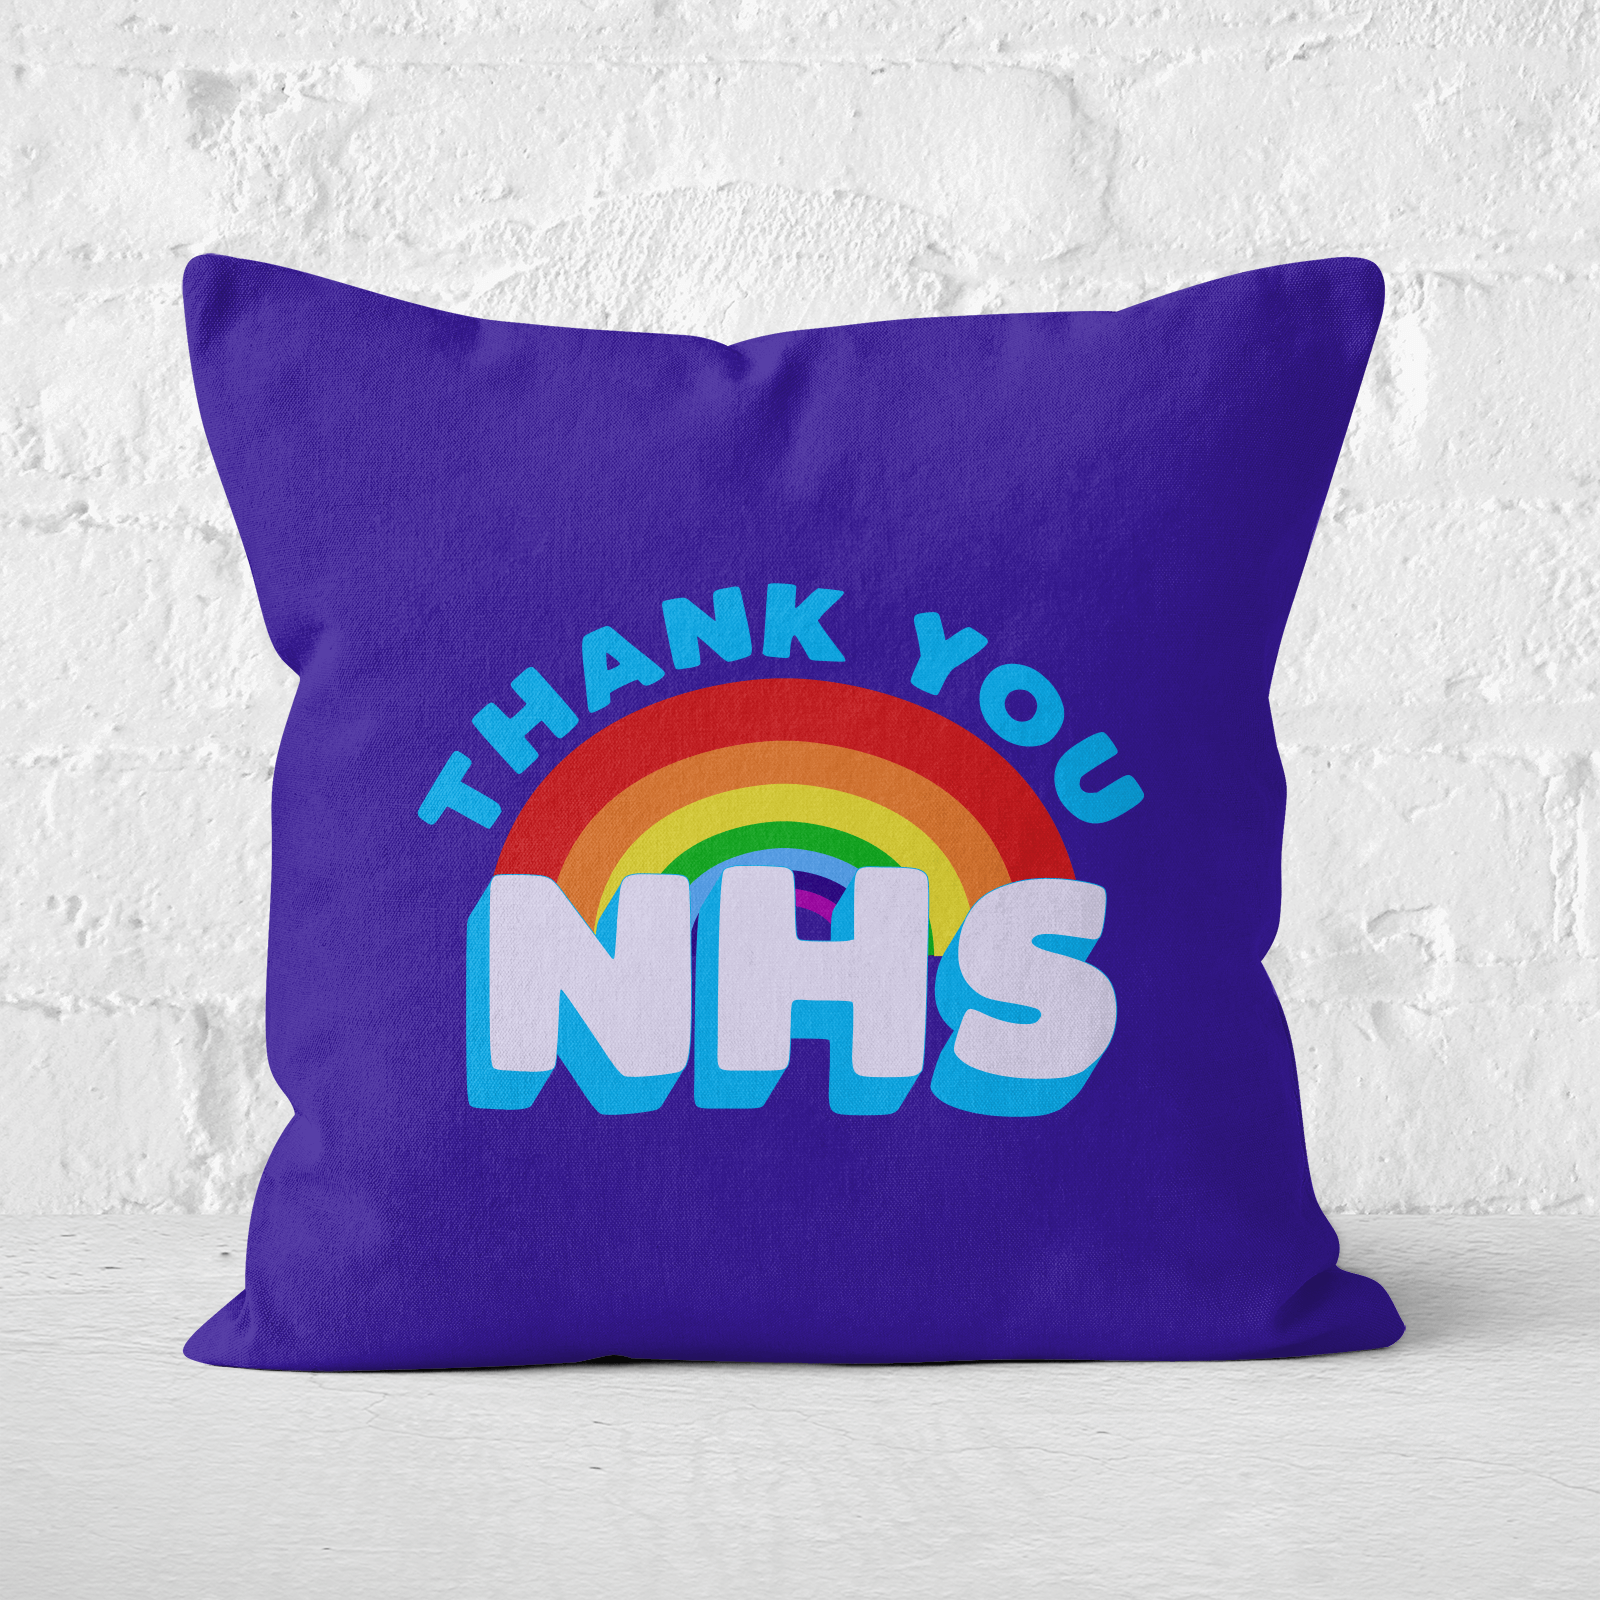 Thank You NHS Square Cushion - 60x60cm - Soft Touch